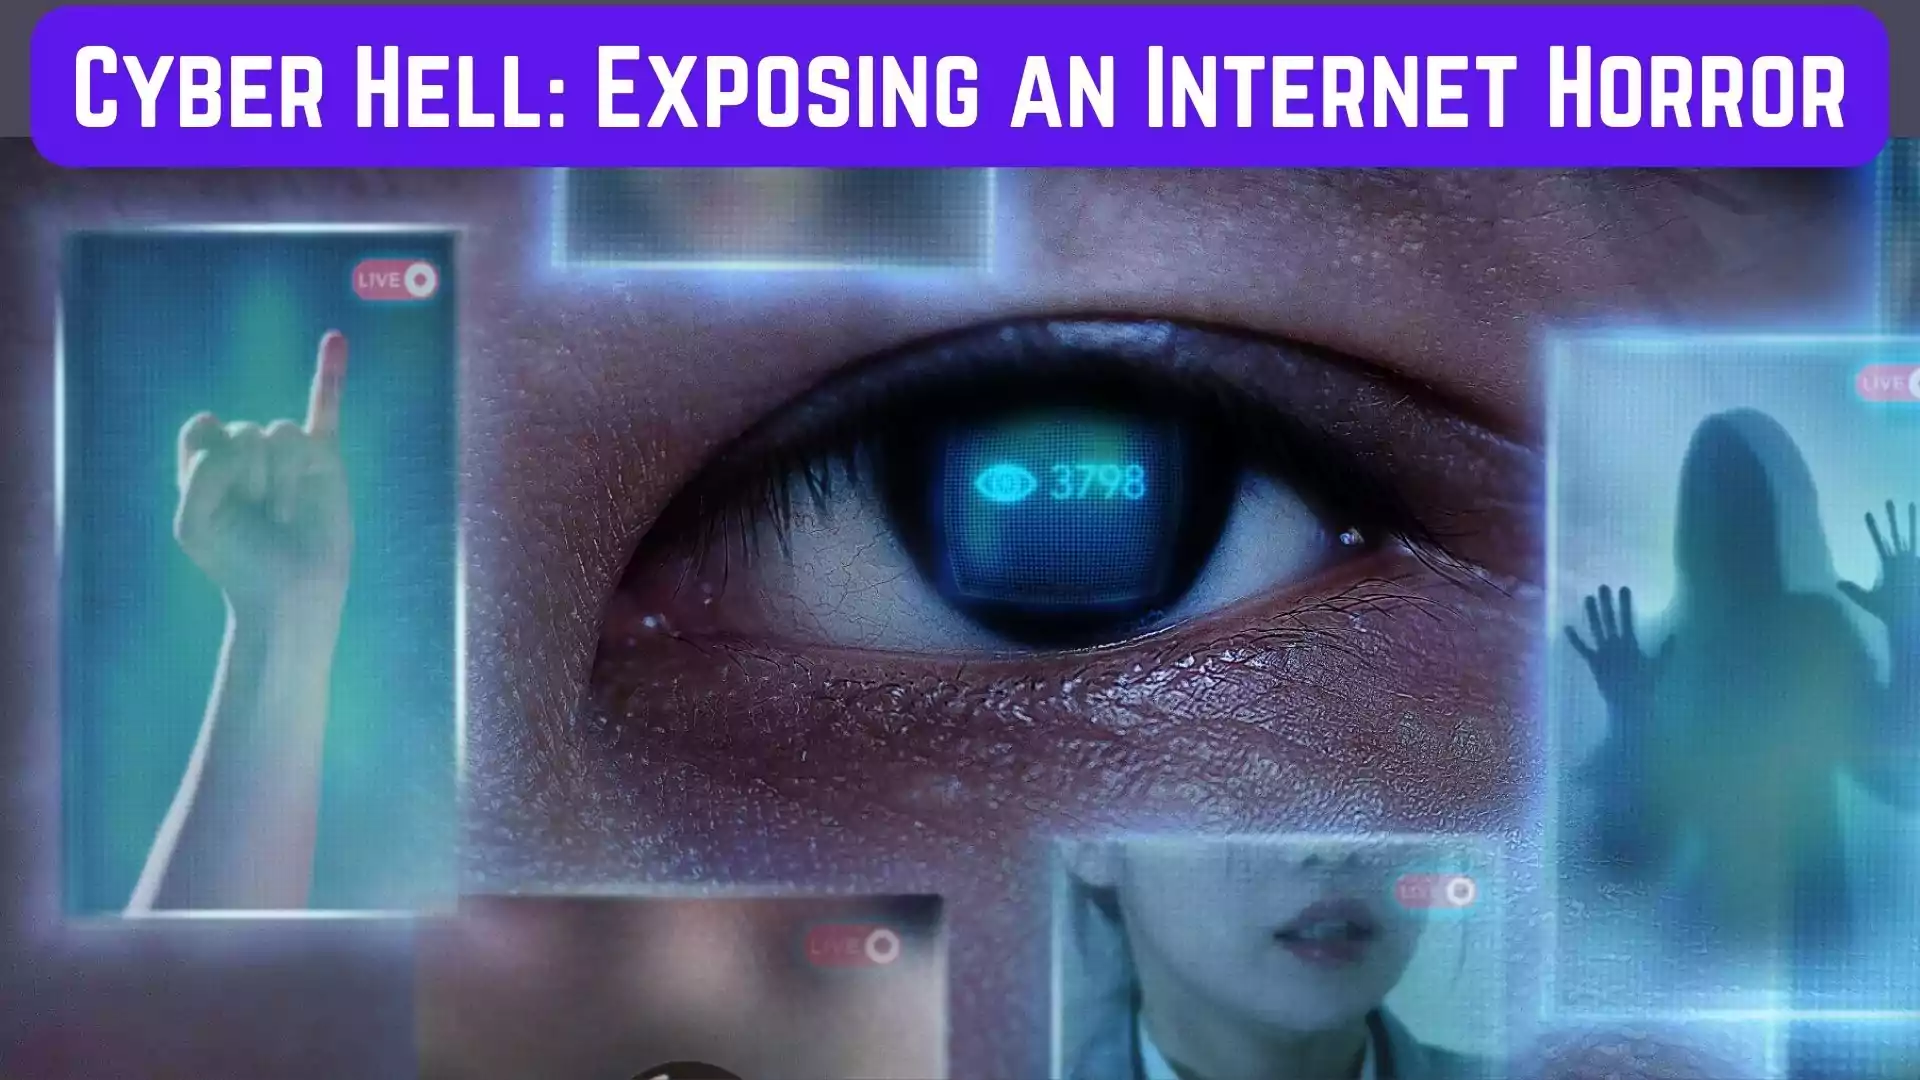 Cyber Hell: Exposing an Internet Horror Parents Guide and Age Rating | 2022